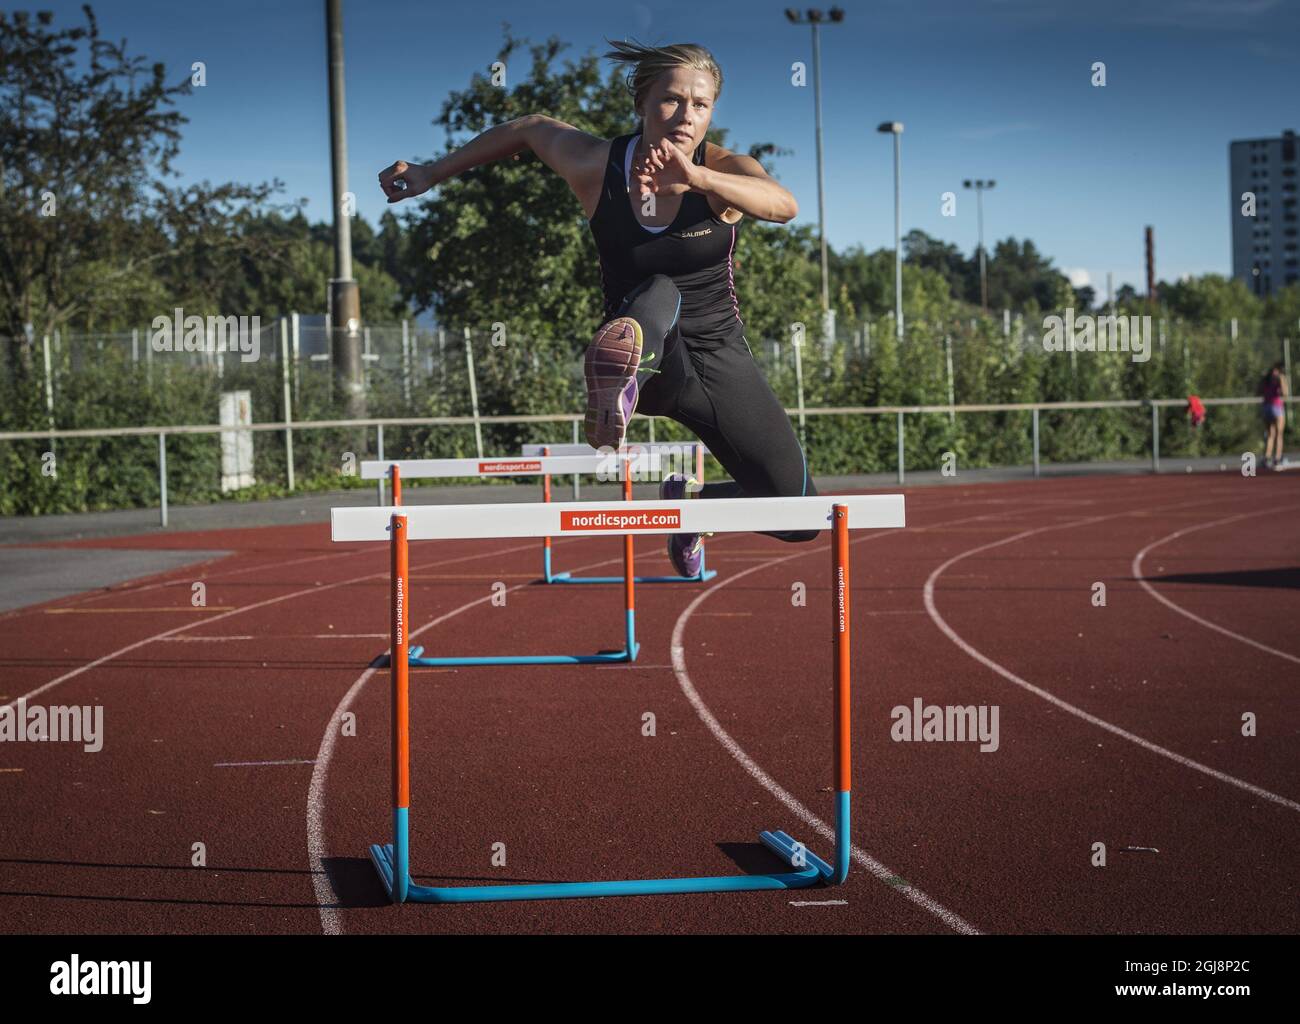 STOCKHOLM 2014-09-08 fotodate 2014-09-02 Bianca Salming is seen during her  decathlon practice with mon Katarina Pettersson and trainer Vlad Petrovic  in Stockholm. Sweden, September 8, 2014. Bianca is daughter of Borje Salming